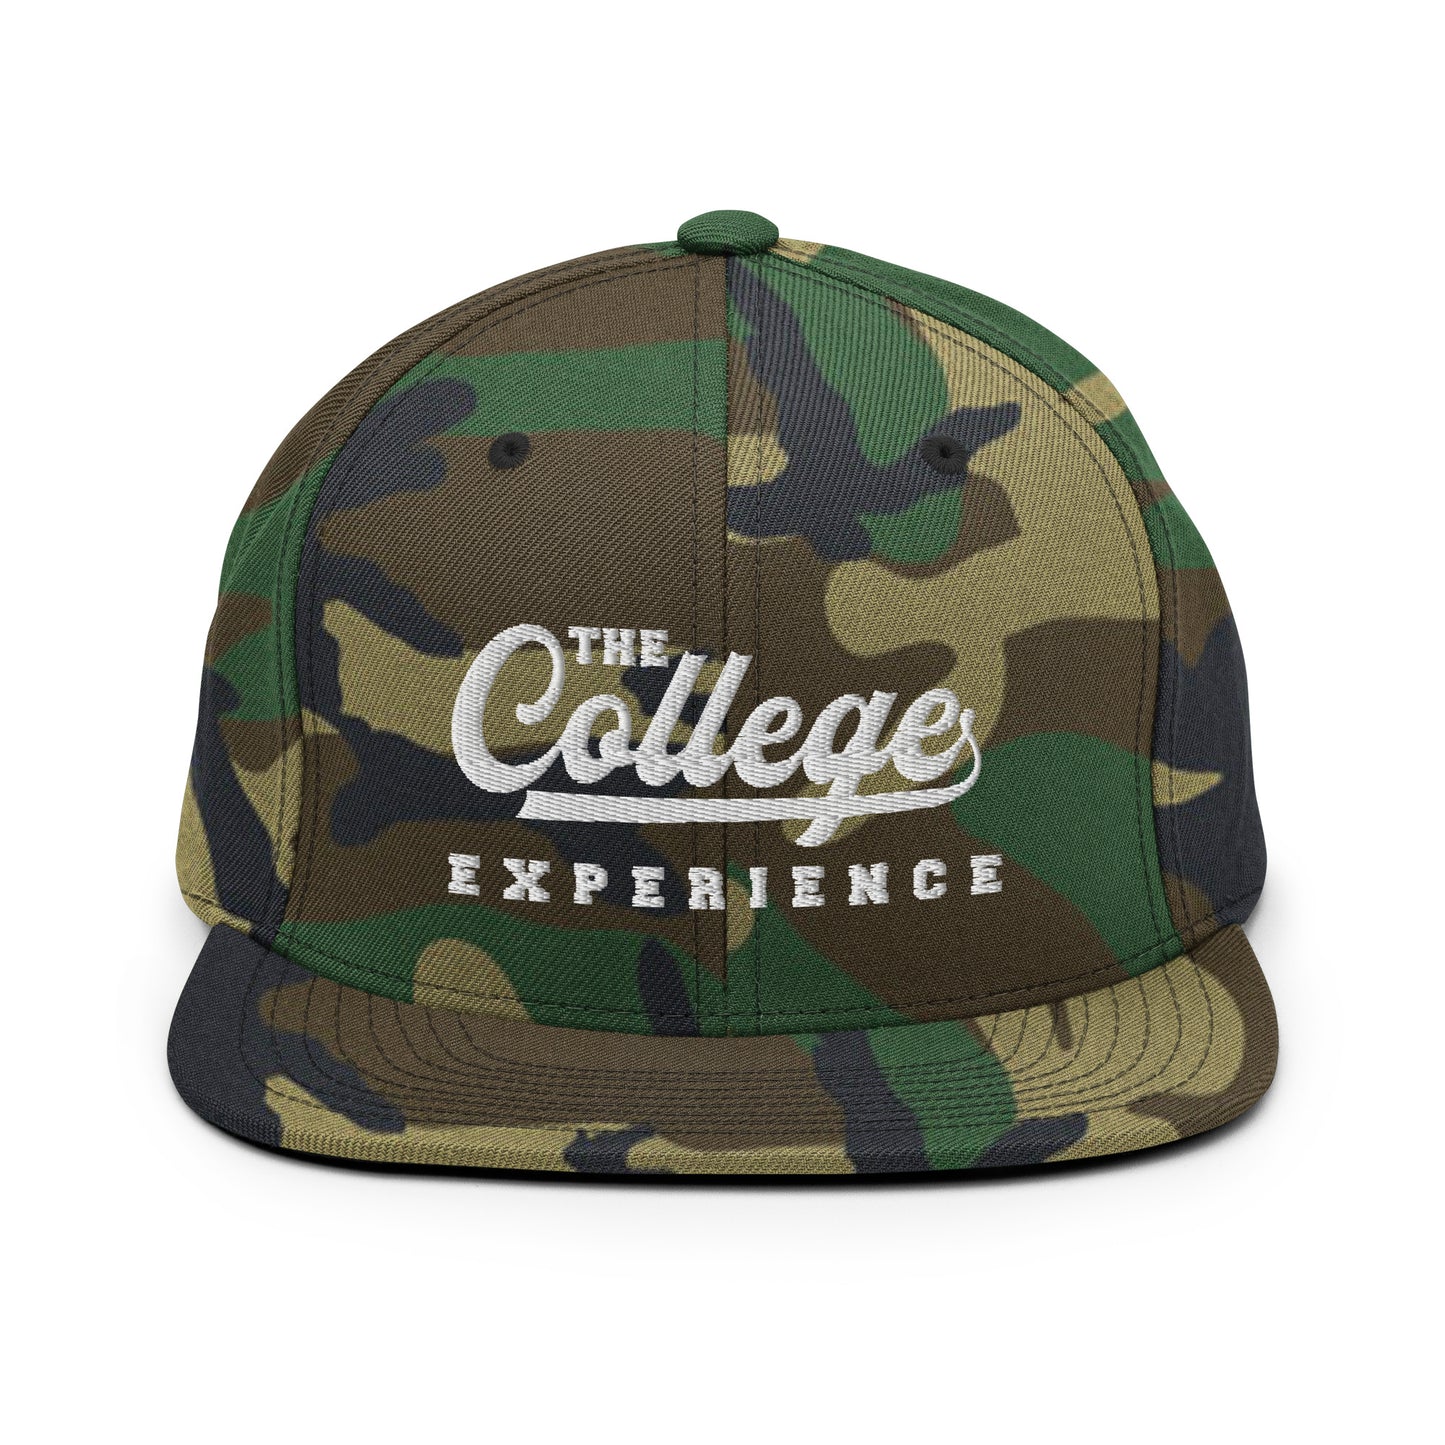 The College Experience - Snapback Hat (White Logo)